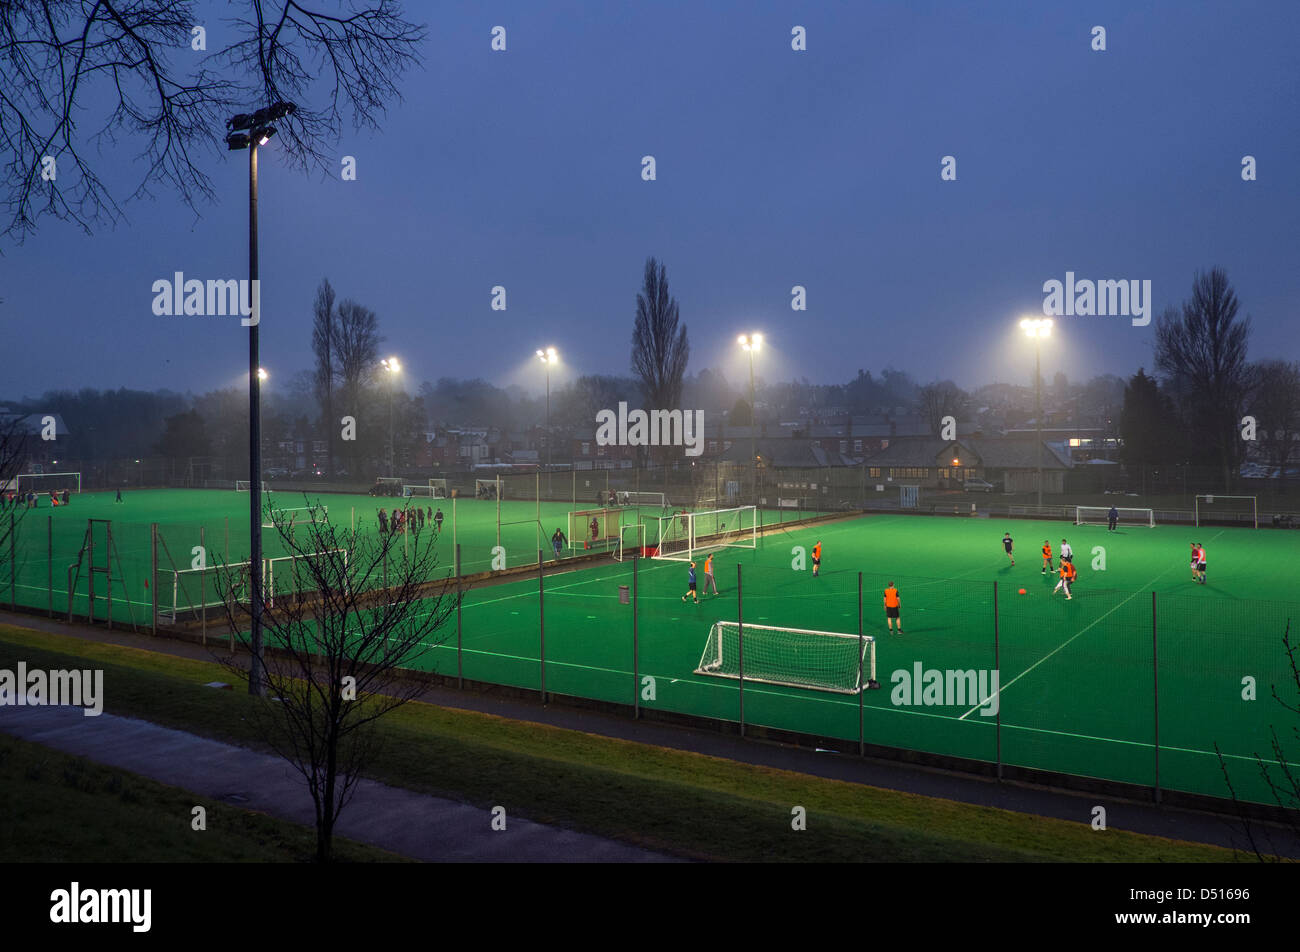 Sports pitches illuminated at night in the grounds if University of Birmingham. Stock Photo